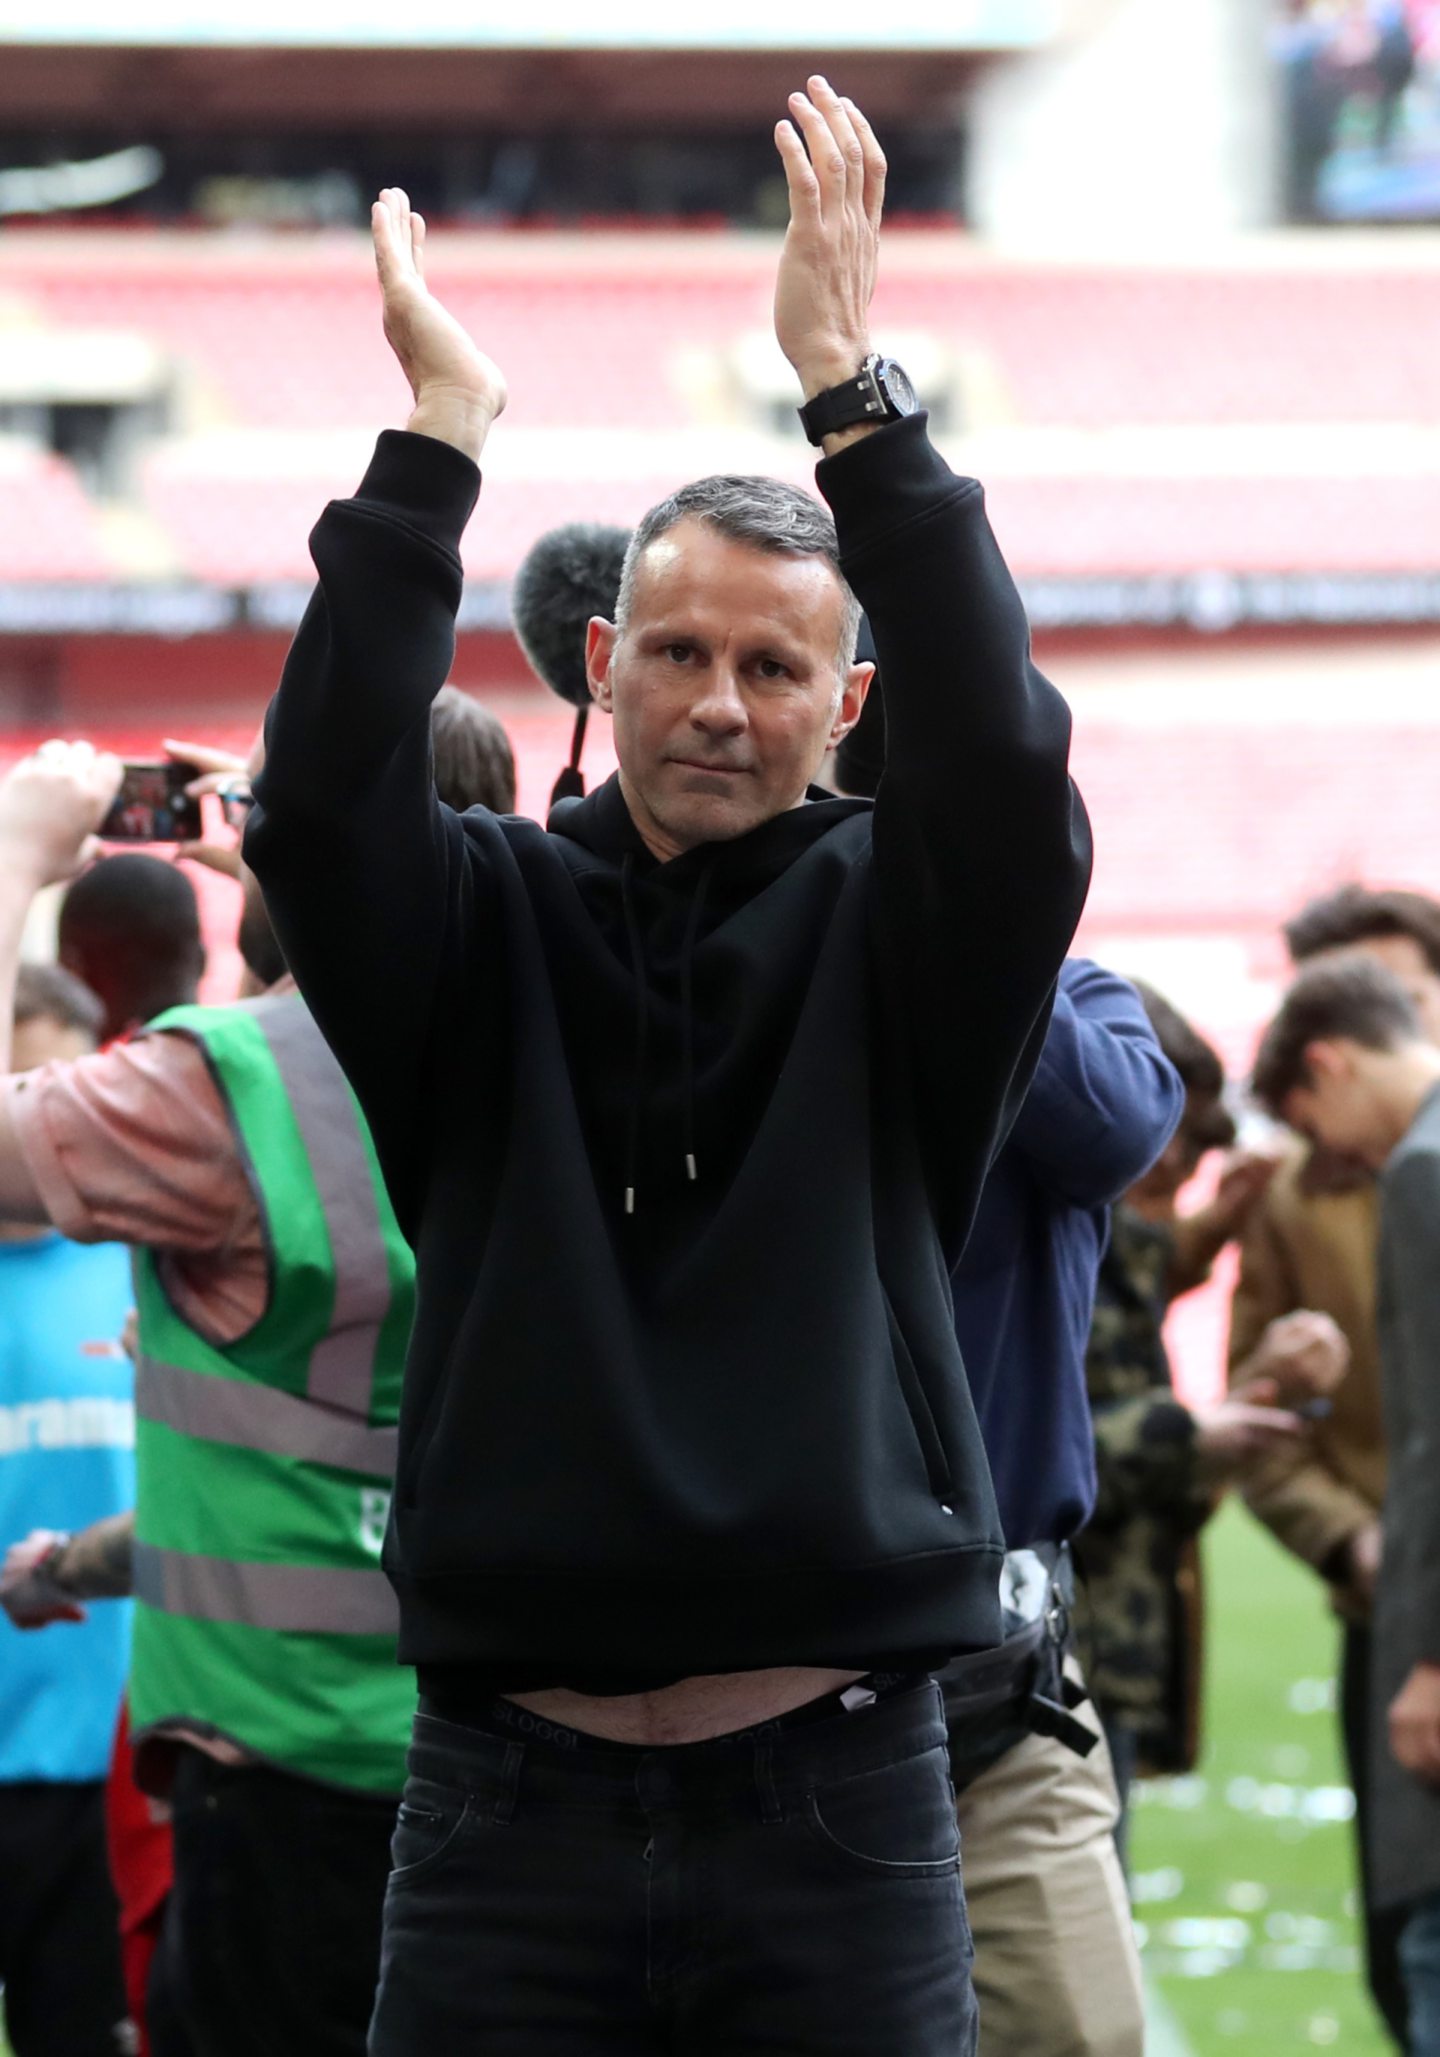 Salford City co-owner Ryan Giggs celebrates after his side wins the Vanarama National League Play-off Final at Wembley Stadium, London in May 2019. Image: PA 